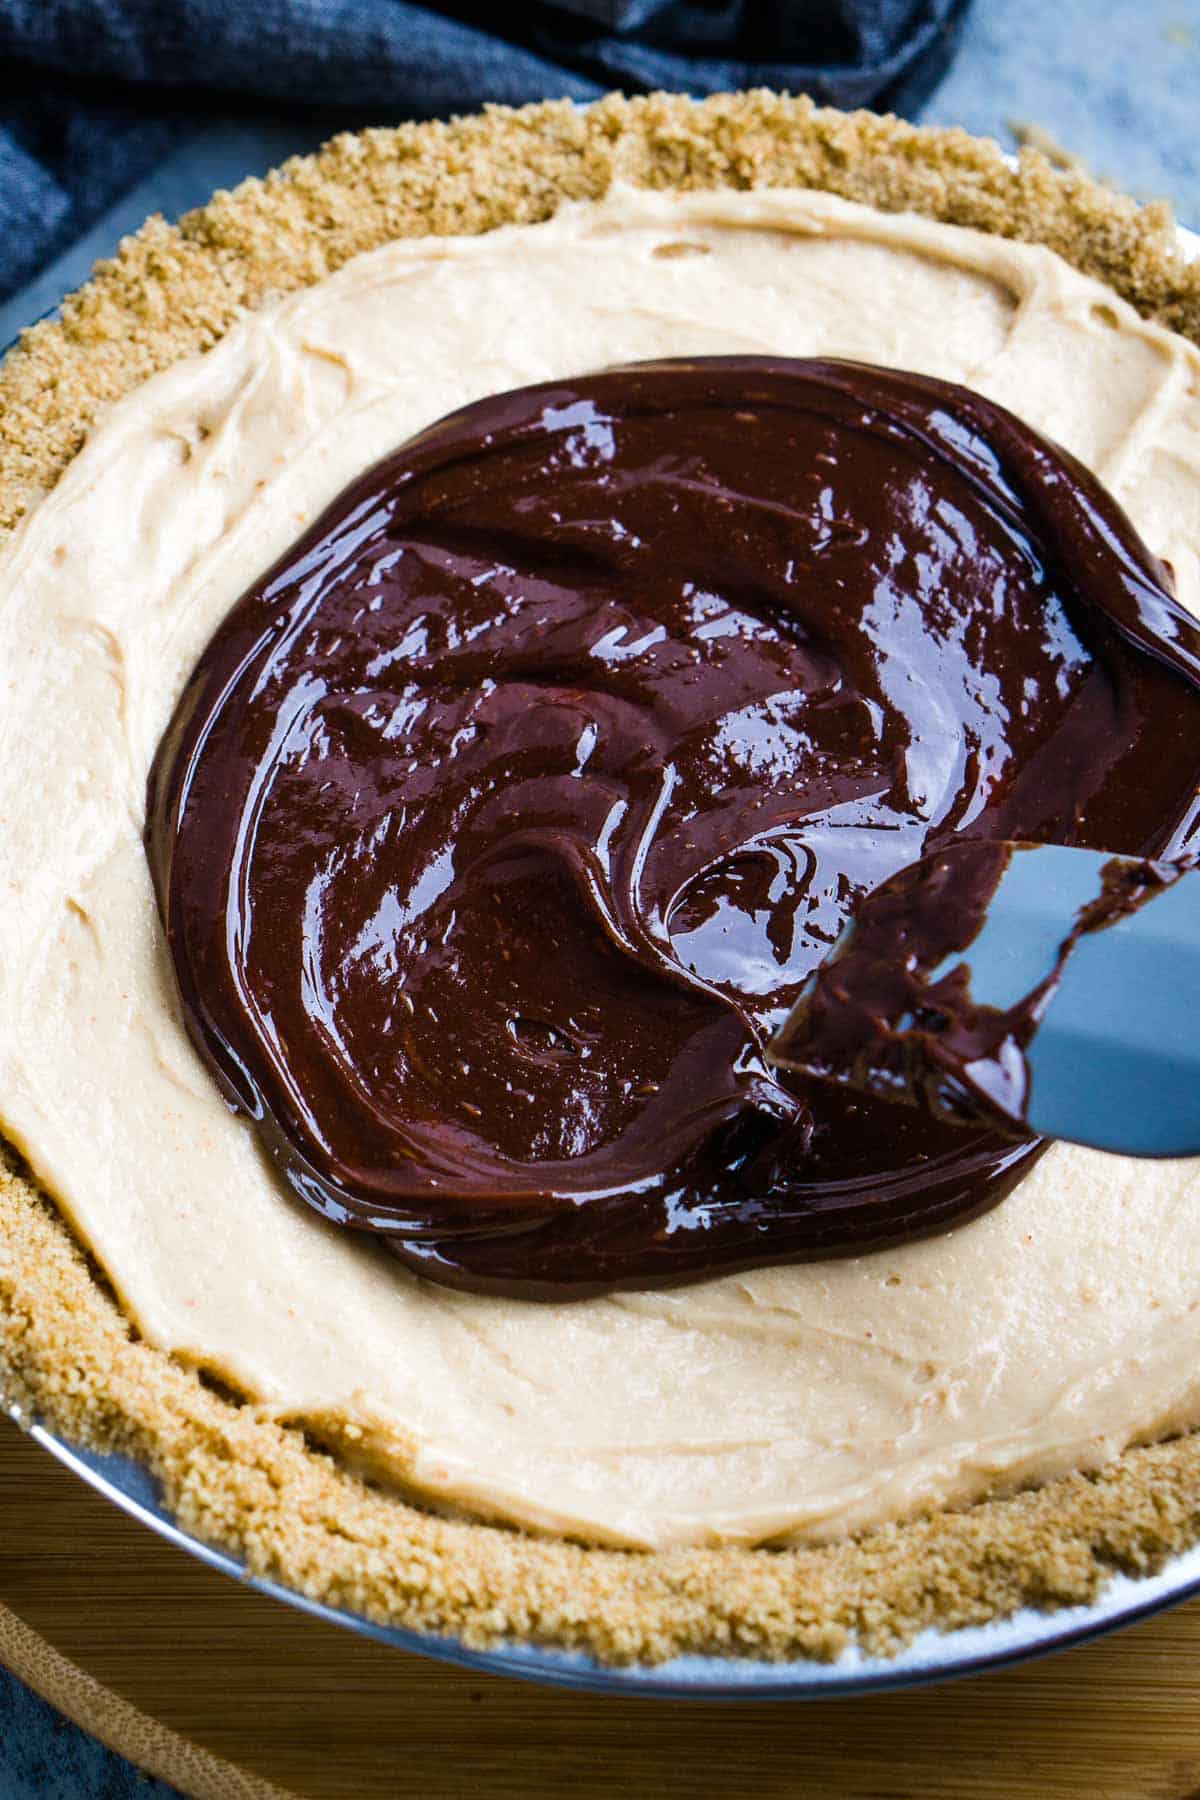 spatula spreads chocolate topping over peanut butter pie filling